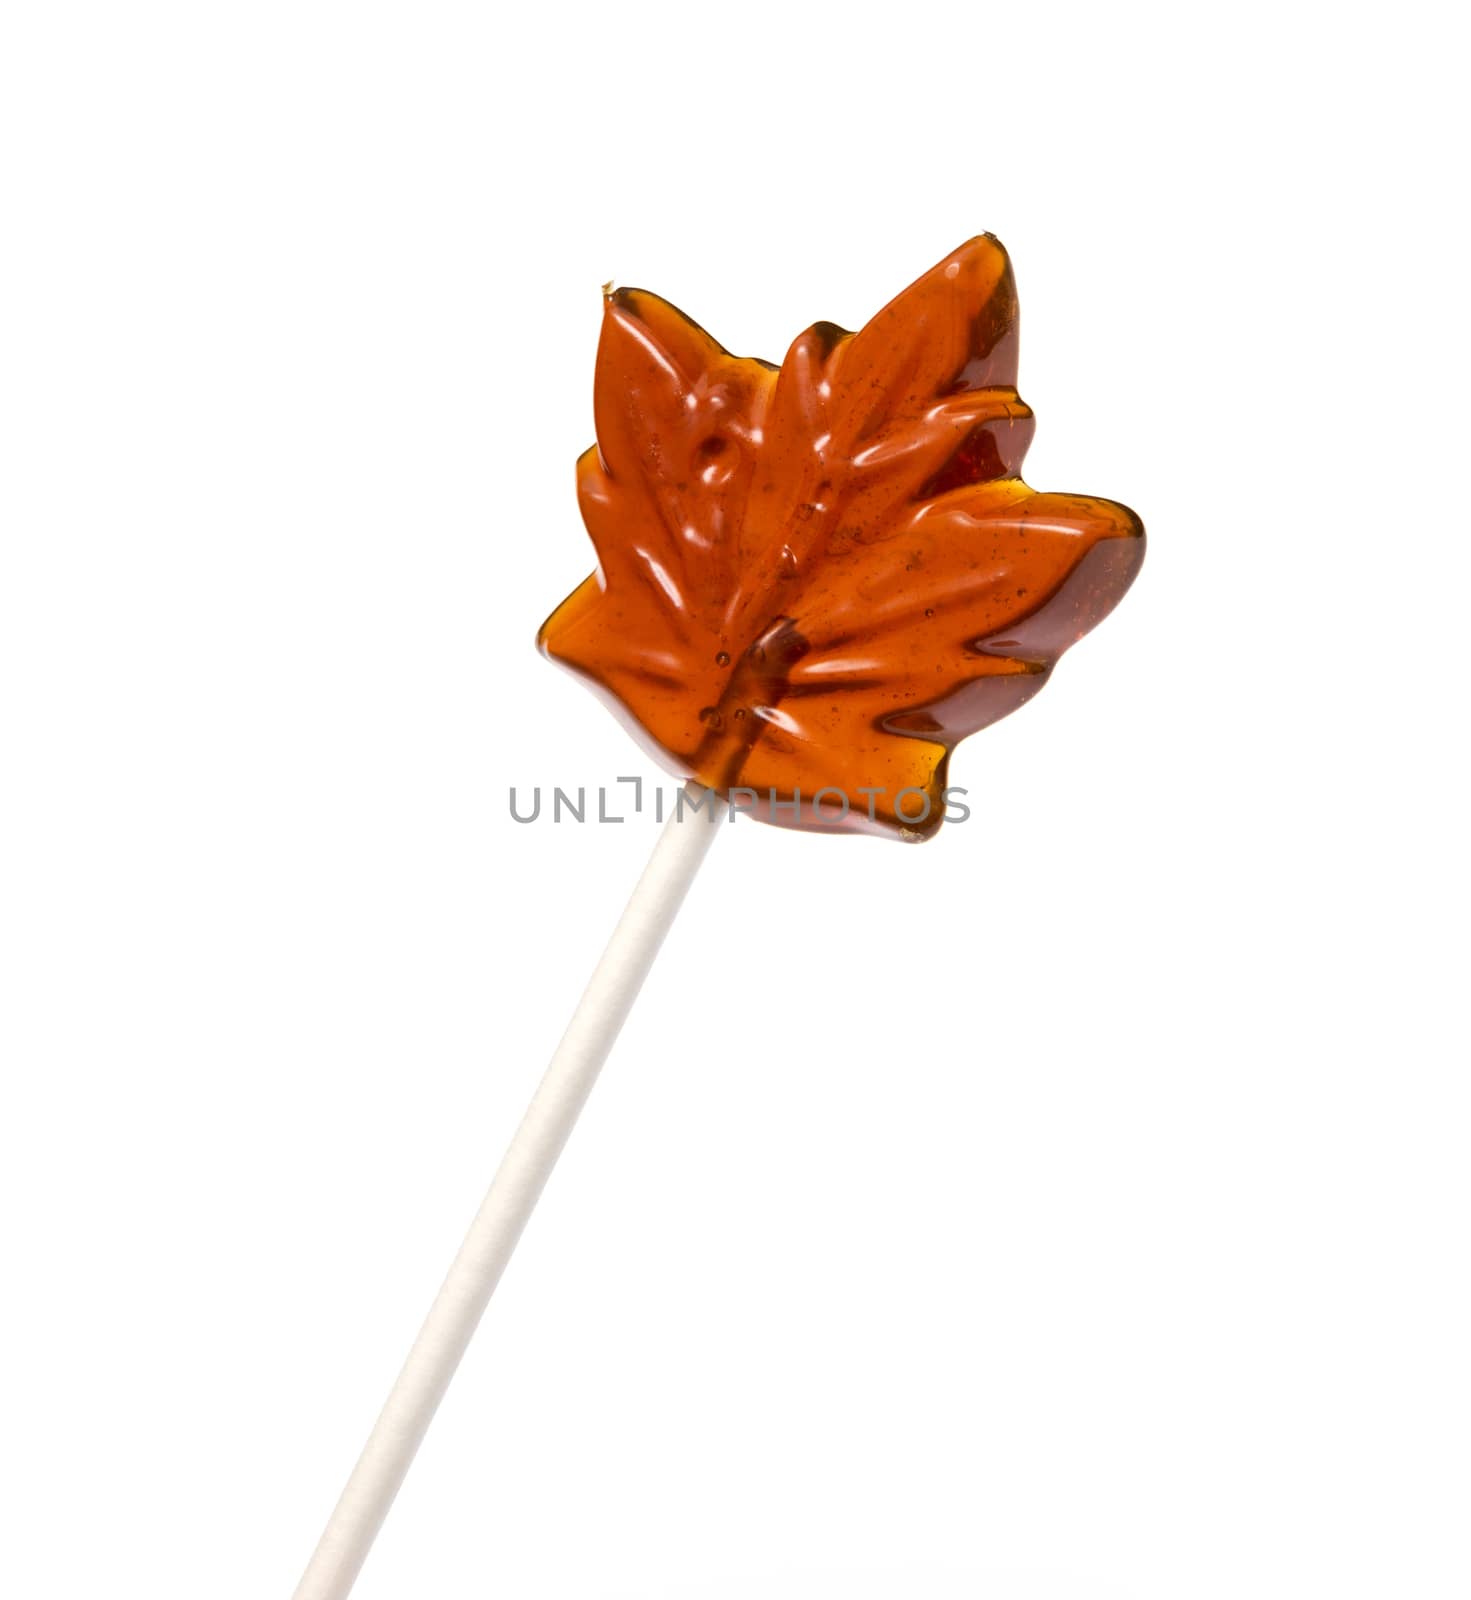 Delicious Maple Syrup Lollipop, on a white background